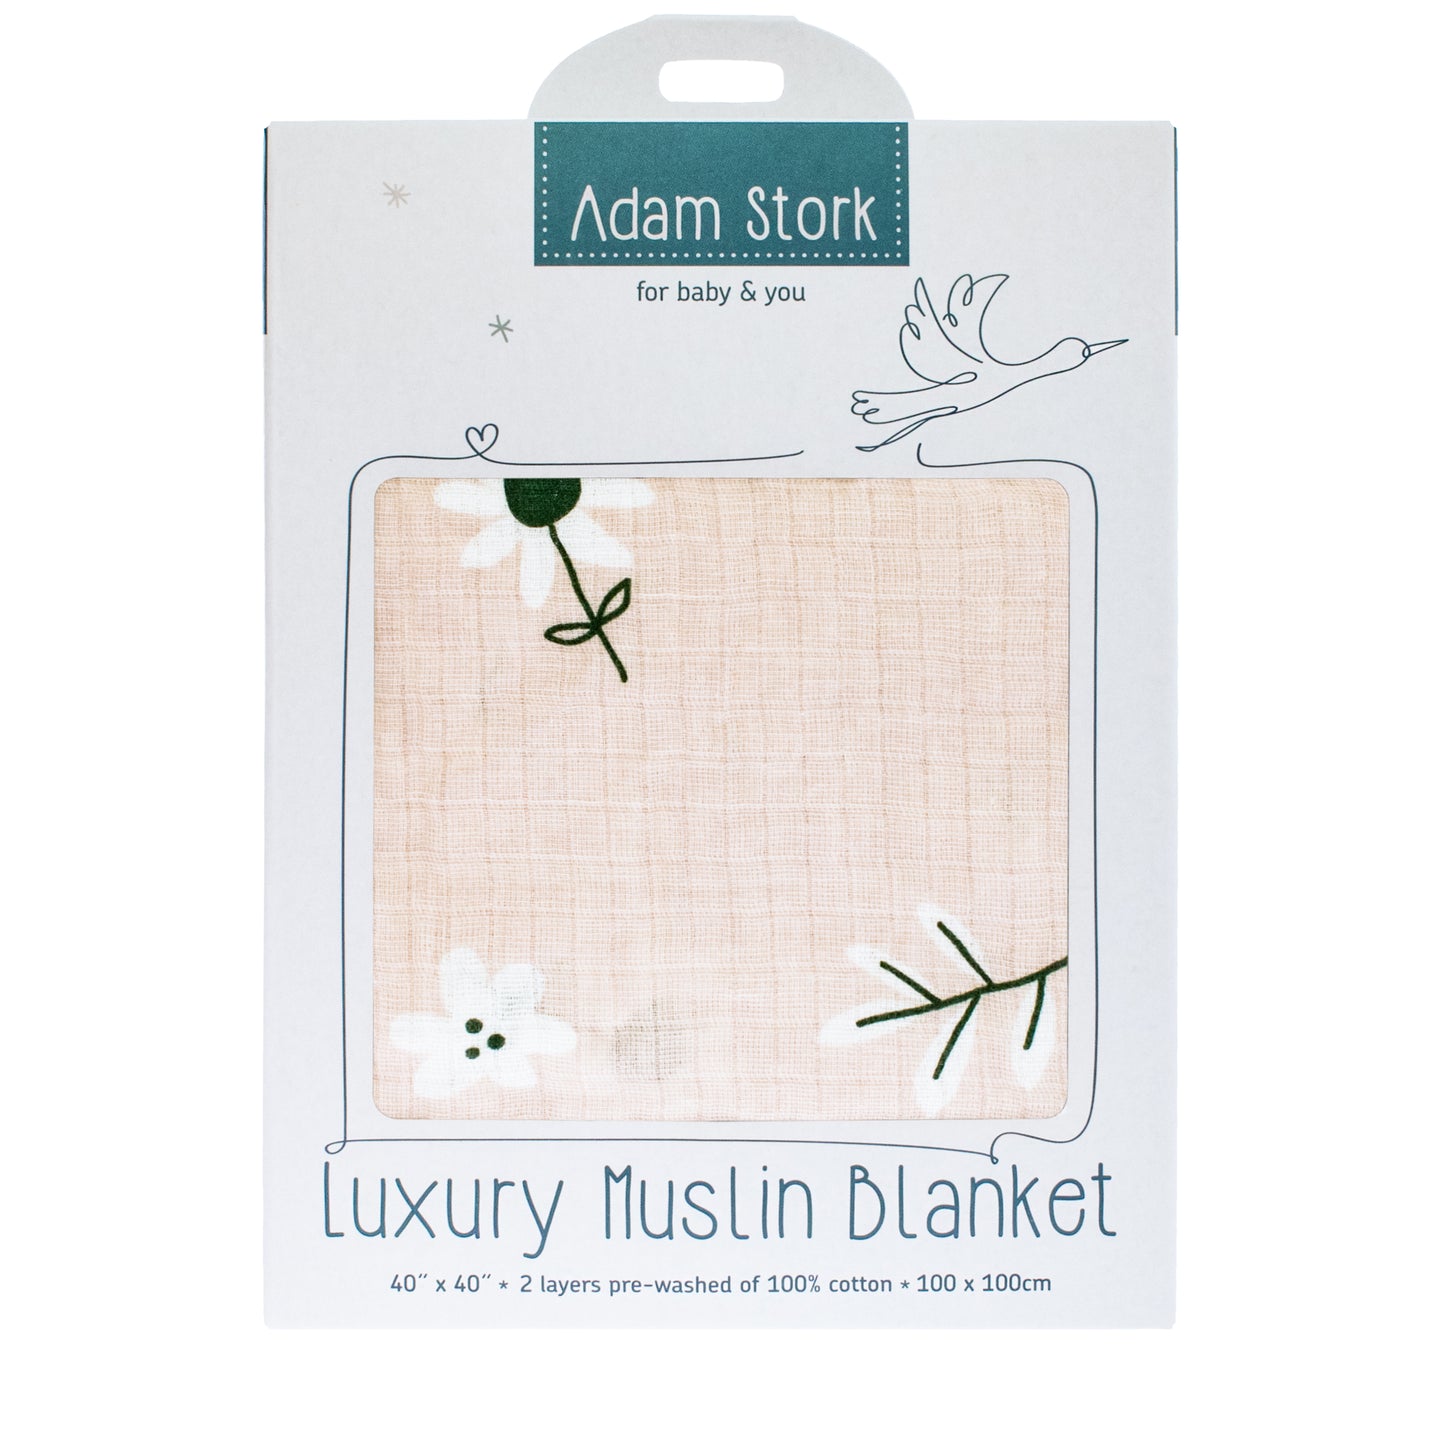 Adam Stork Muslin Swaddle Blanket Girl - Receiving Blanket for your Newborn Baby for a Swaddle Wrap, Nursing Cover, for Summer, Beach, Stroller - Floral Pink Wildflower